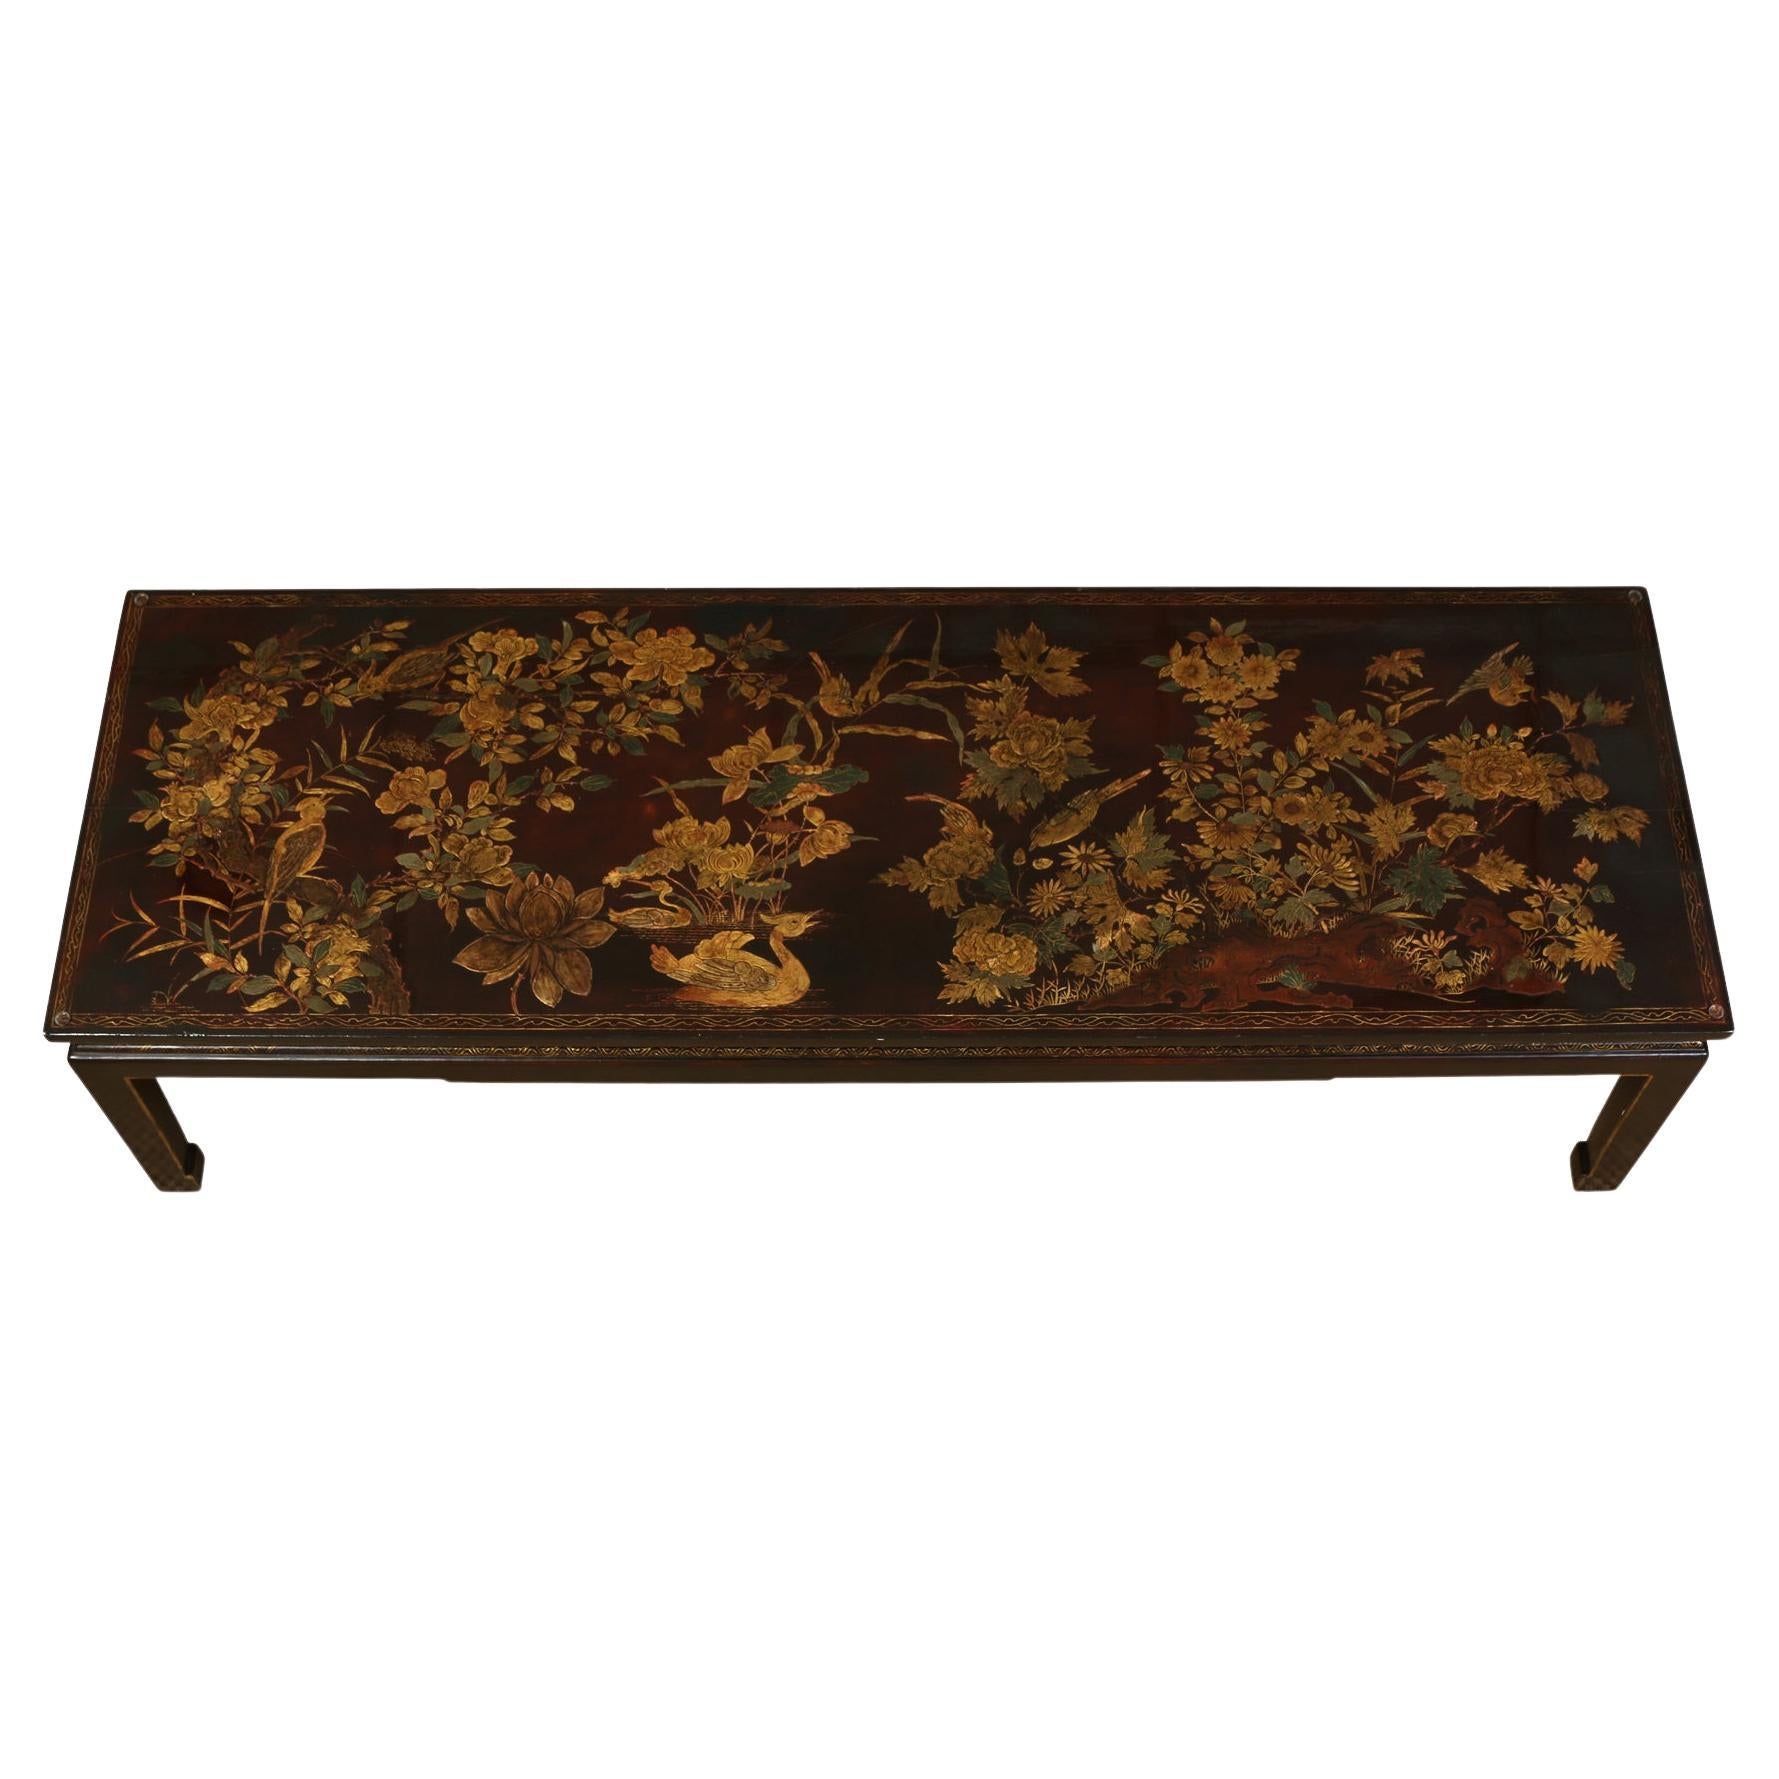 Chinoiserie Gilt Decorated Chocolate Brown Coffee Table With Glass Top